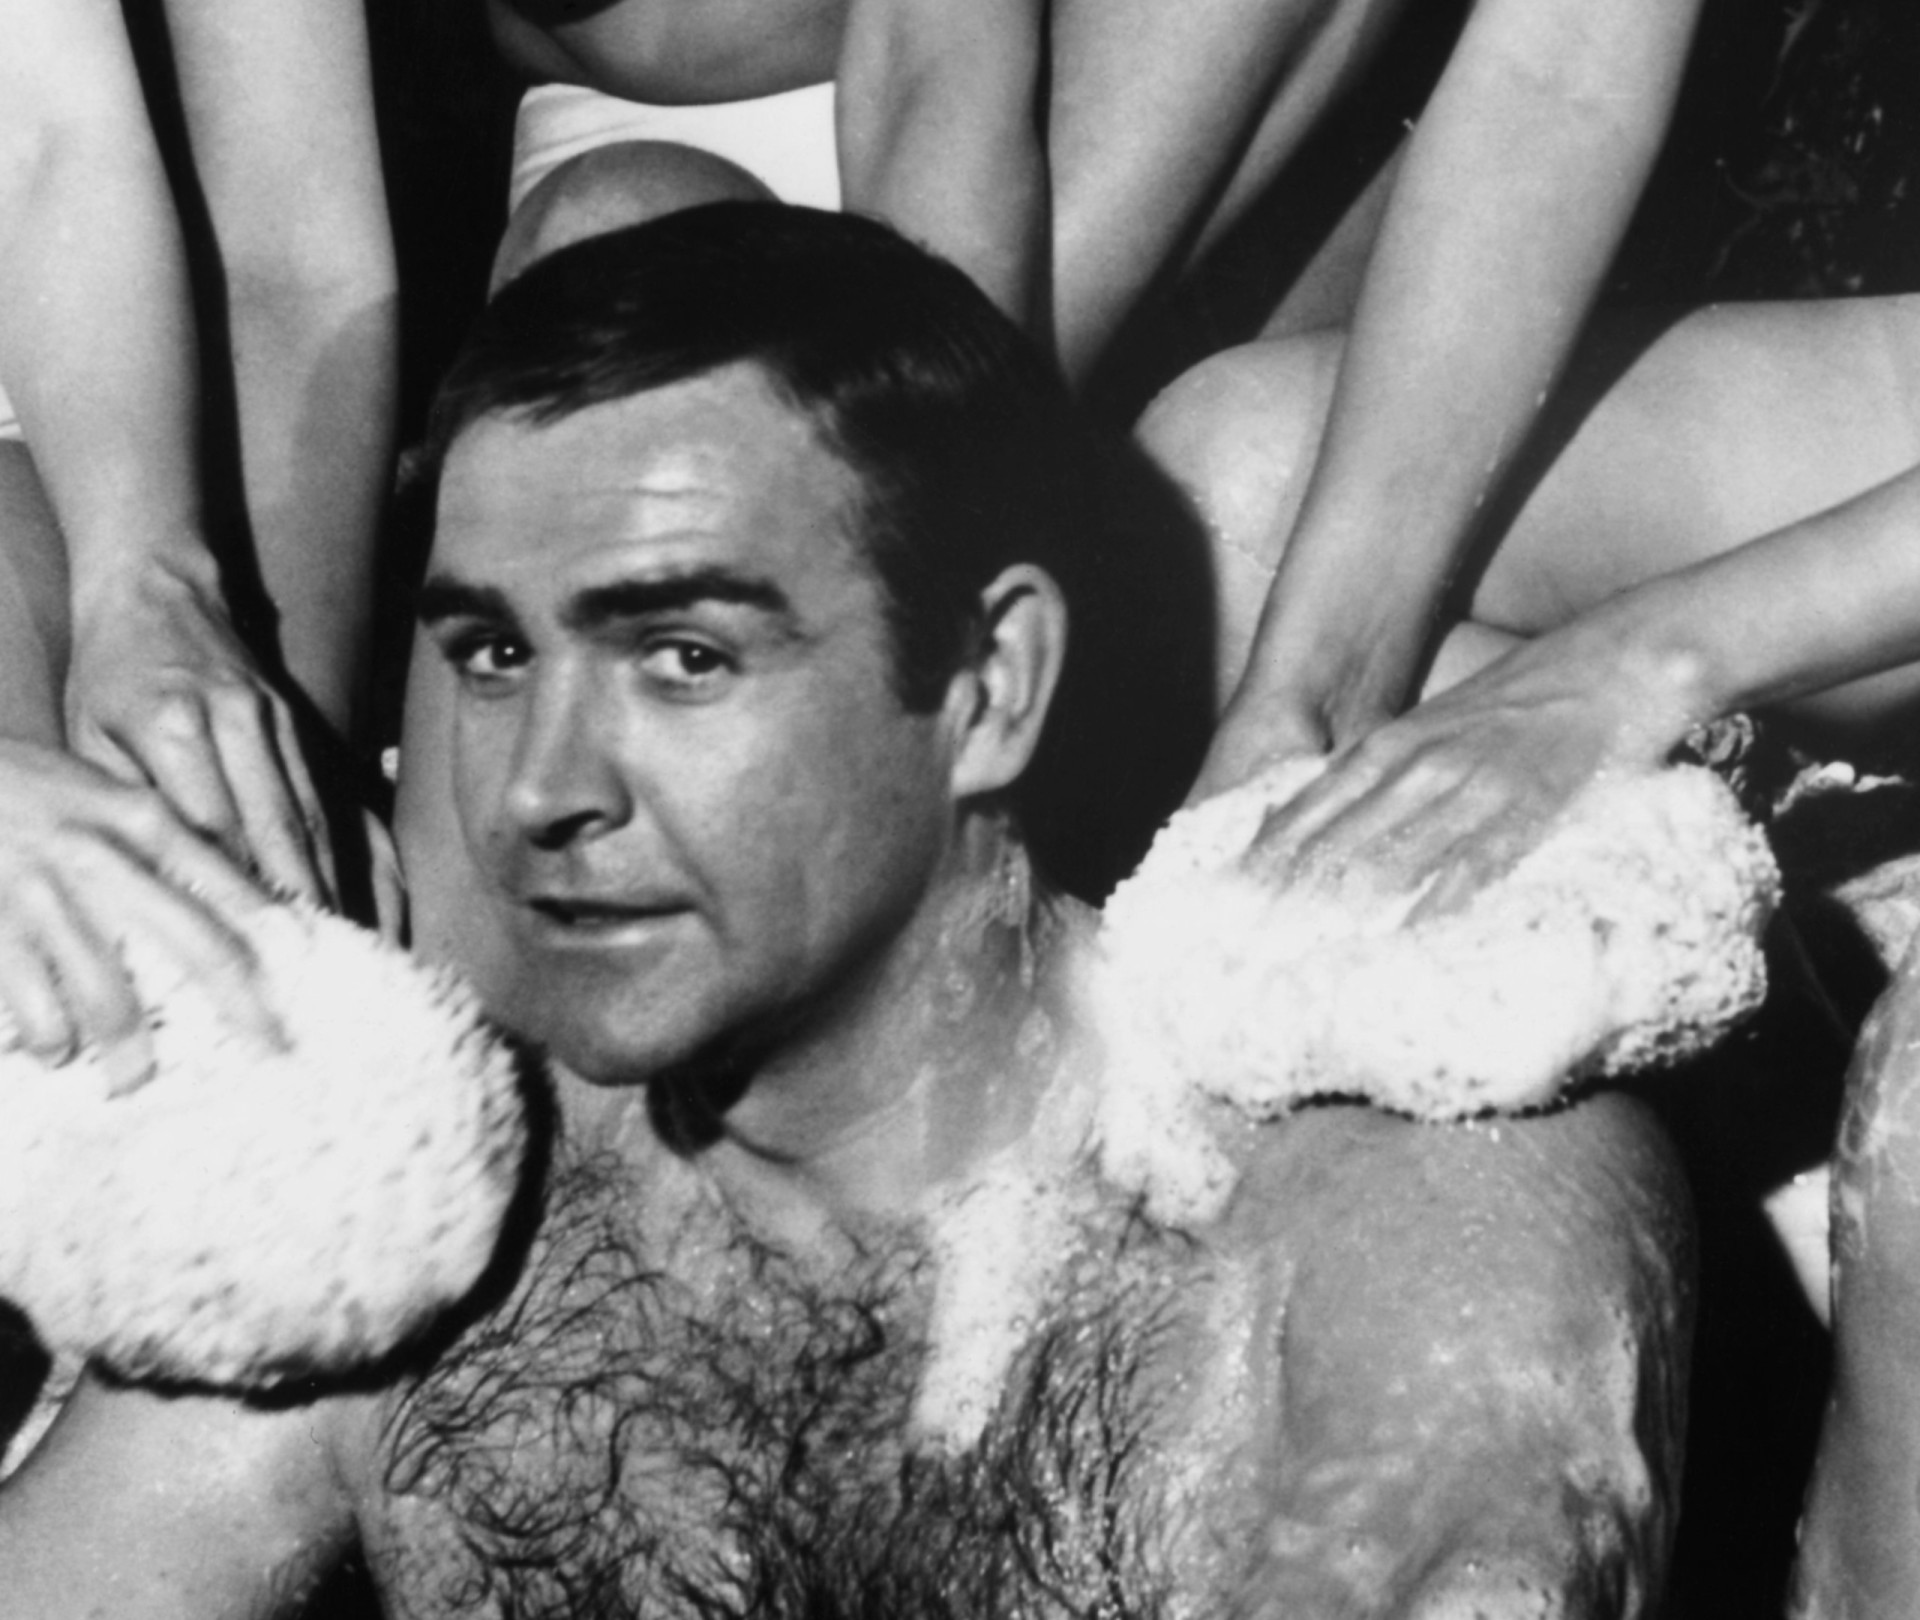 <p>James Bond (Sean Connery) gets a helping hand or two, or three, as he's sponged down slowly in 1967's 'You Only Live Twice.'</p><p>You may also like:<a href="https://www.starsinsider.com/n/384084?utm_source=msn.com&utm_medium=display&utm_campaign=referral_description&utm_content=546036en-en"> Arnold Schwarzenegger's best movies... and his worst!</a></p>